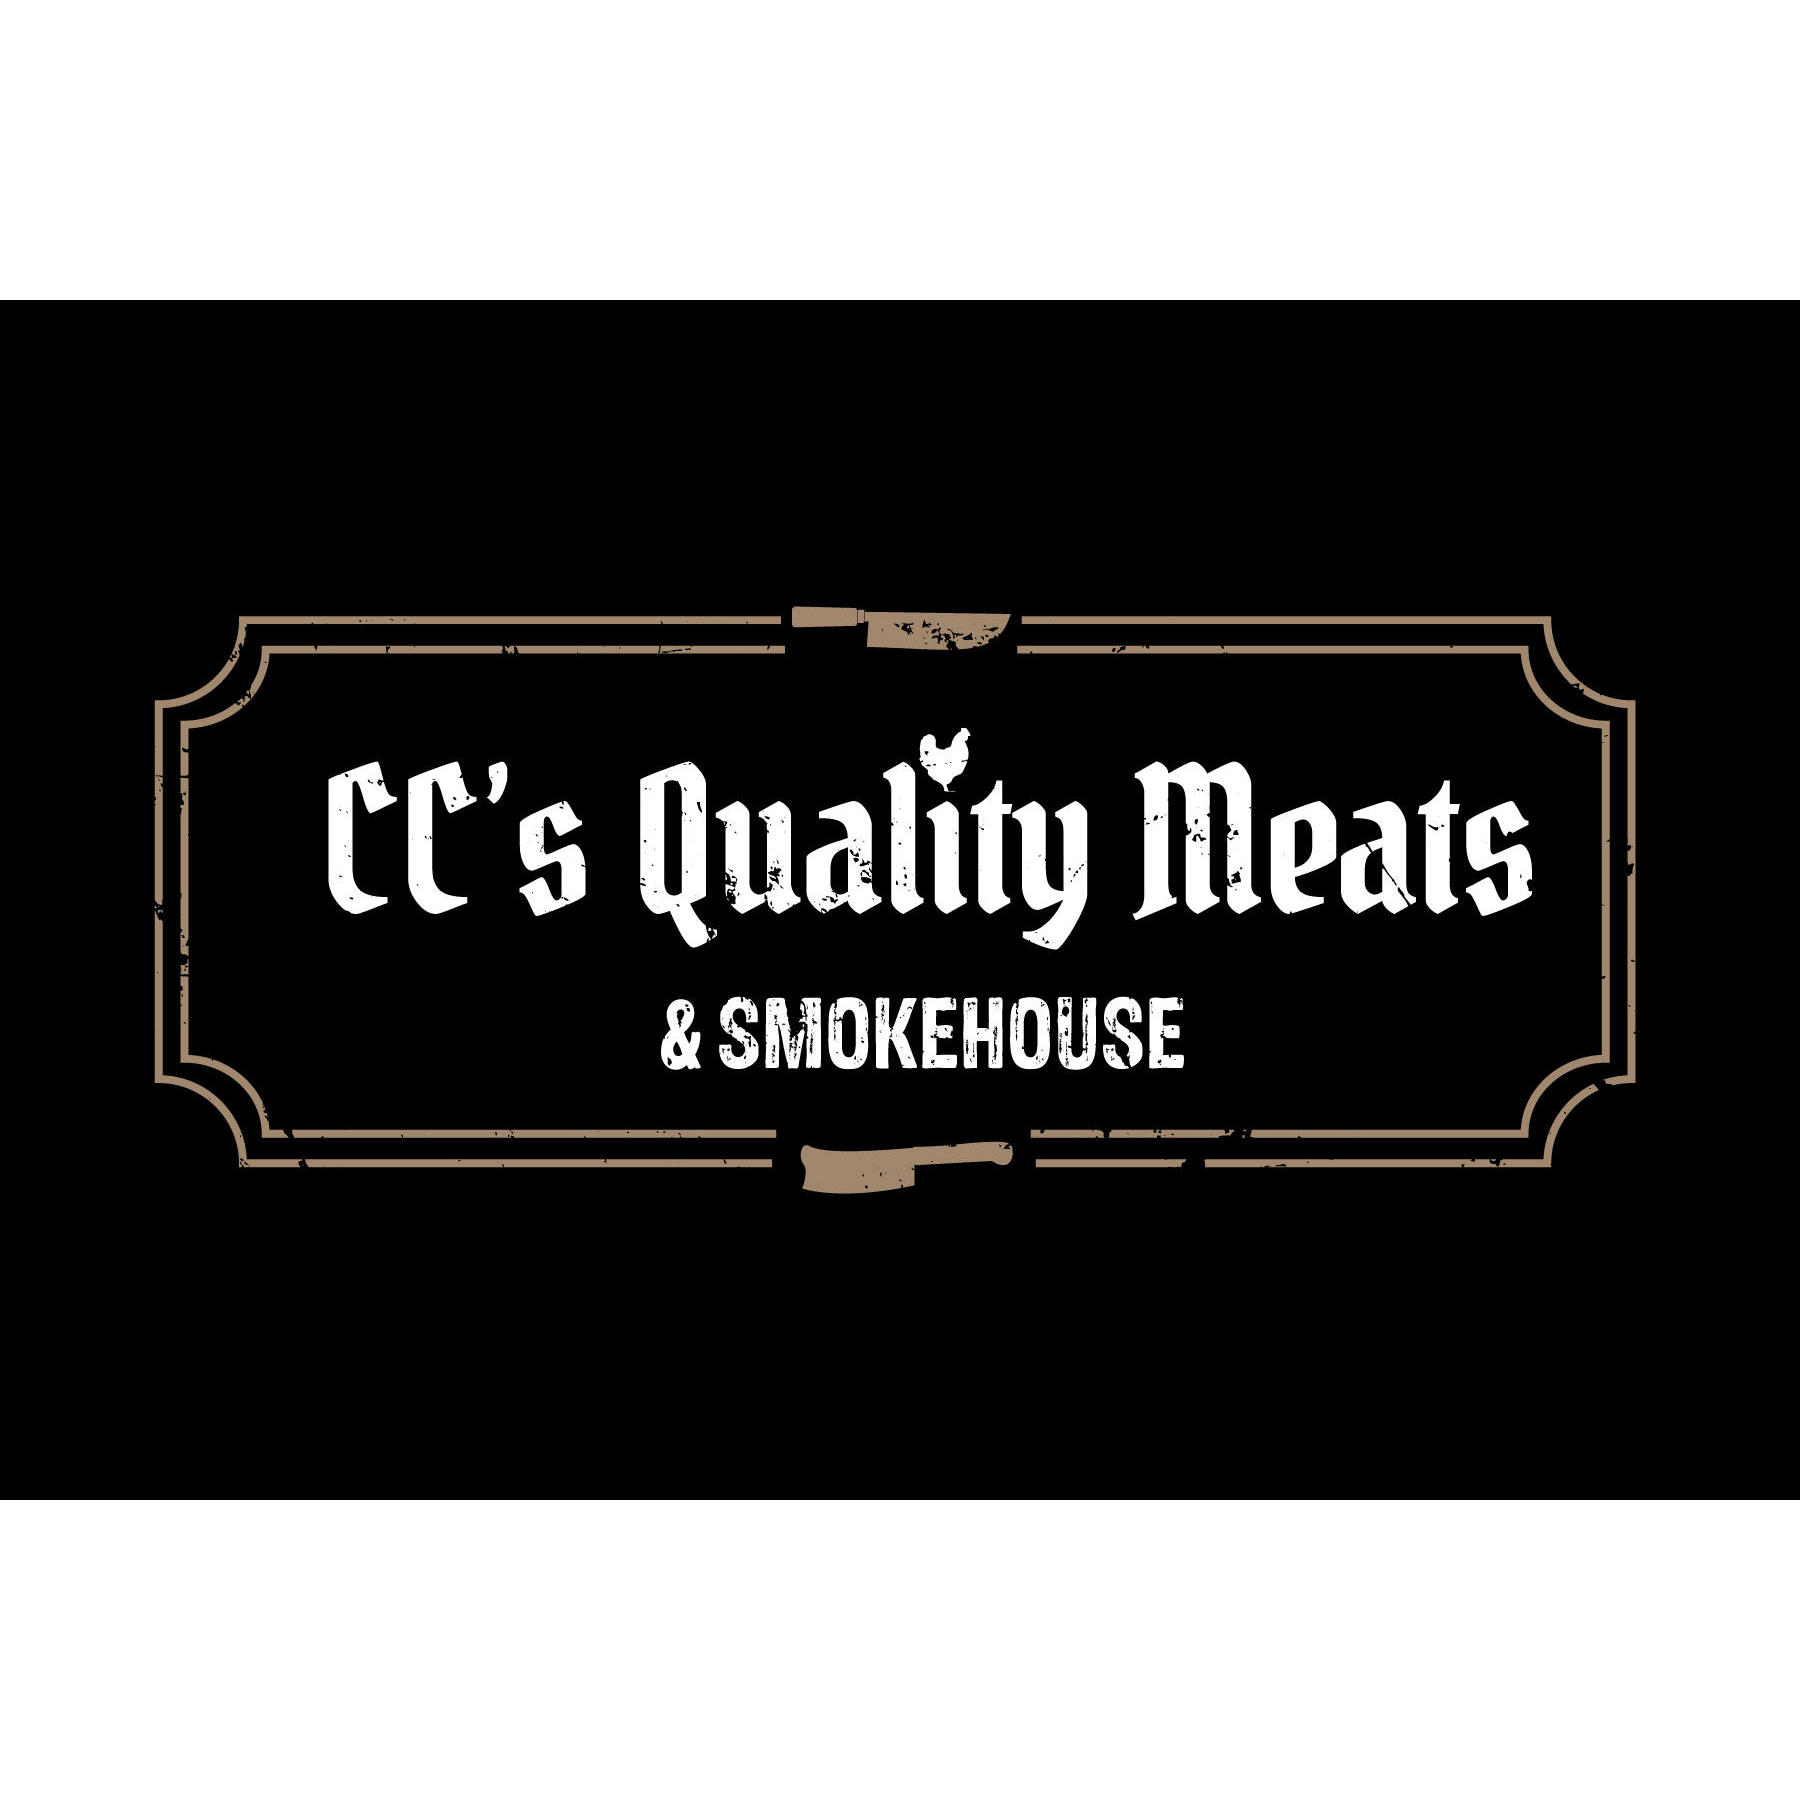 CC's Quality Meats and Smokehouse - Beechworth, VIC 3747 - (03) 5728 1441 | ShowMeLocal.com